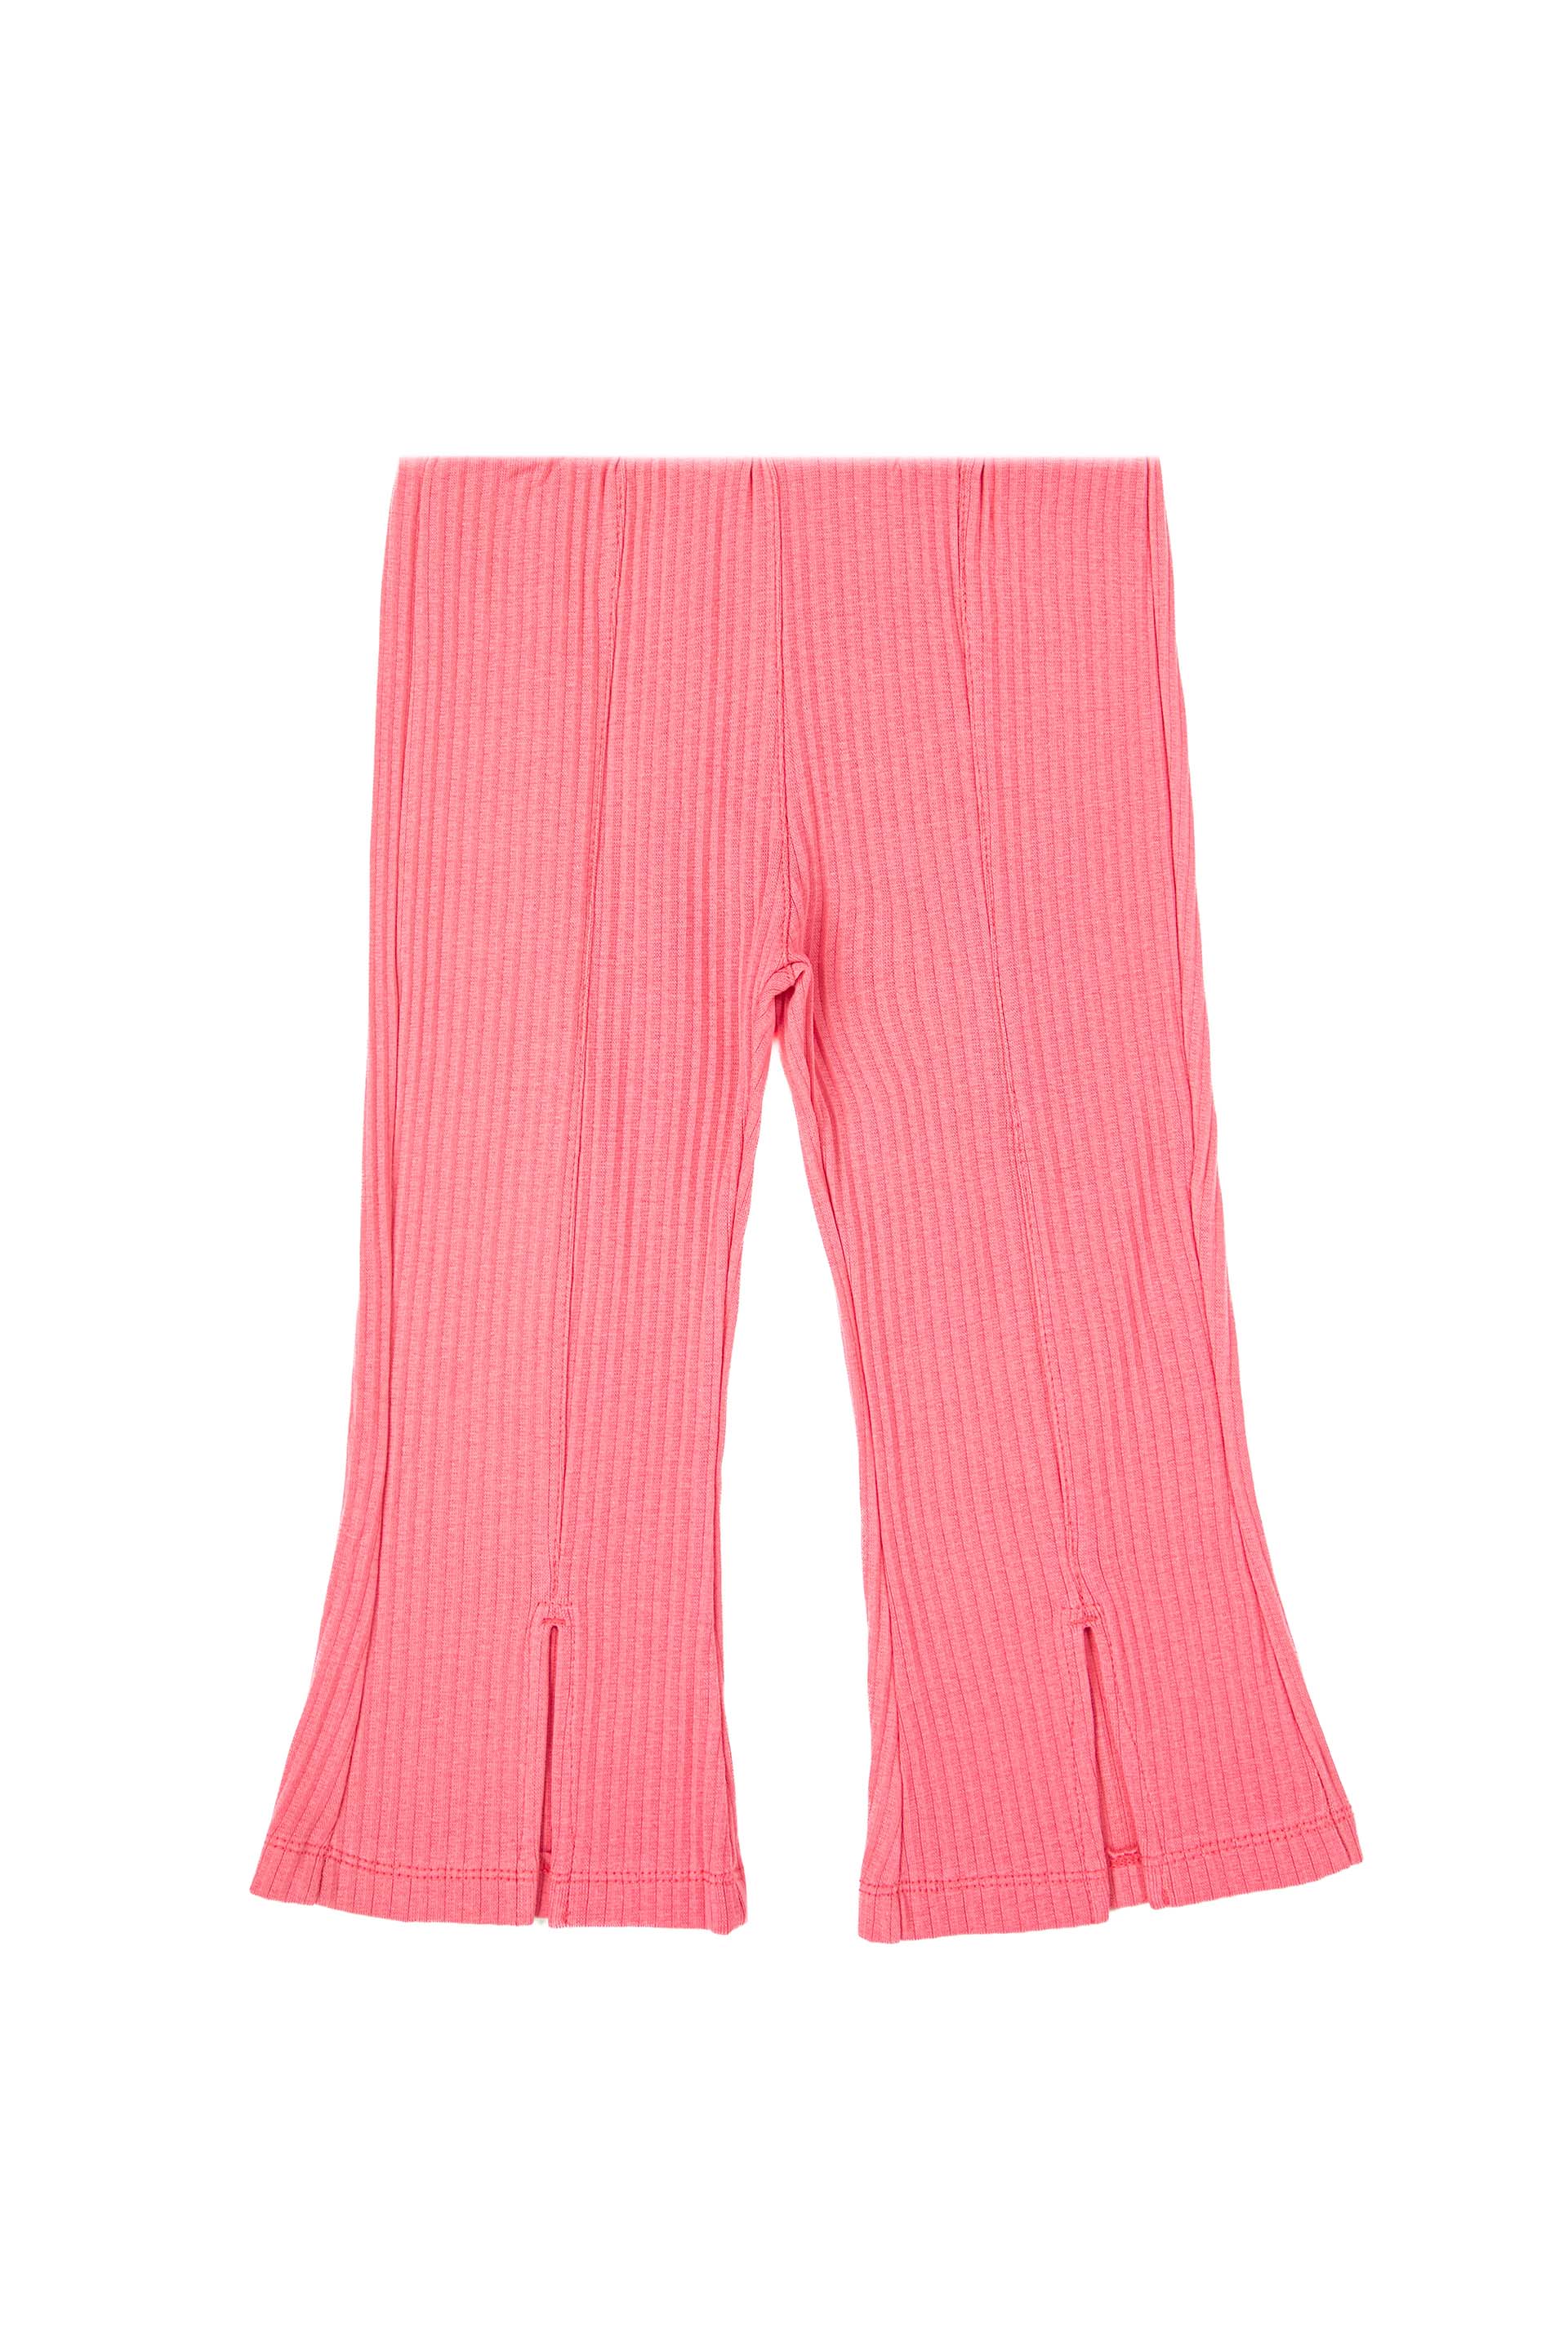 Bellbottom Trousers Pink